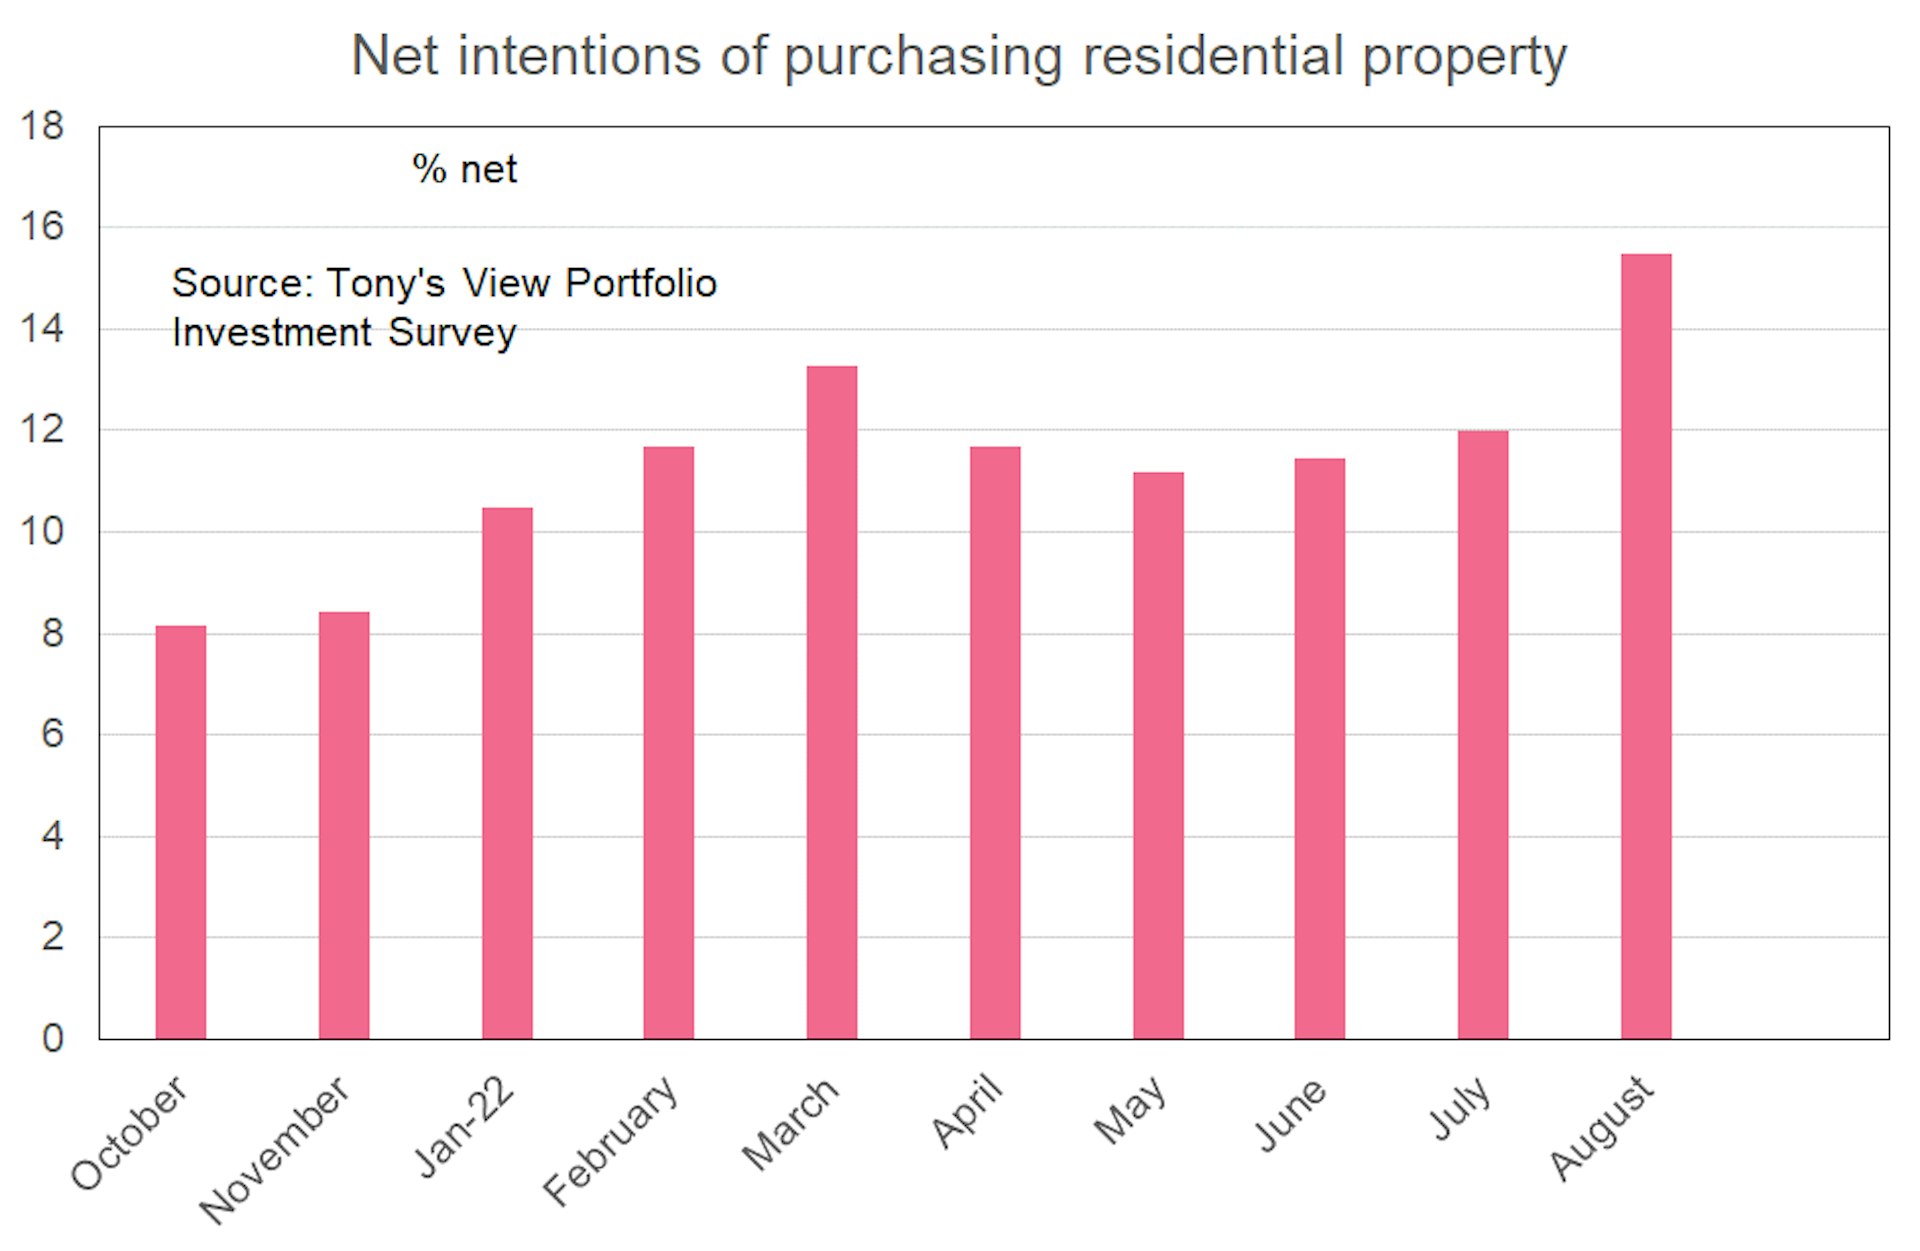 Bar graph showing net intentions of purchasing residential property. A net 16% of respondents plan to purchase property, up from 12% last month. 